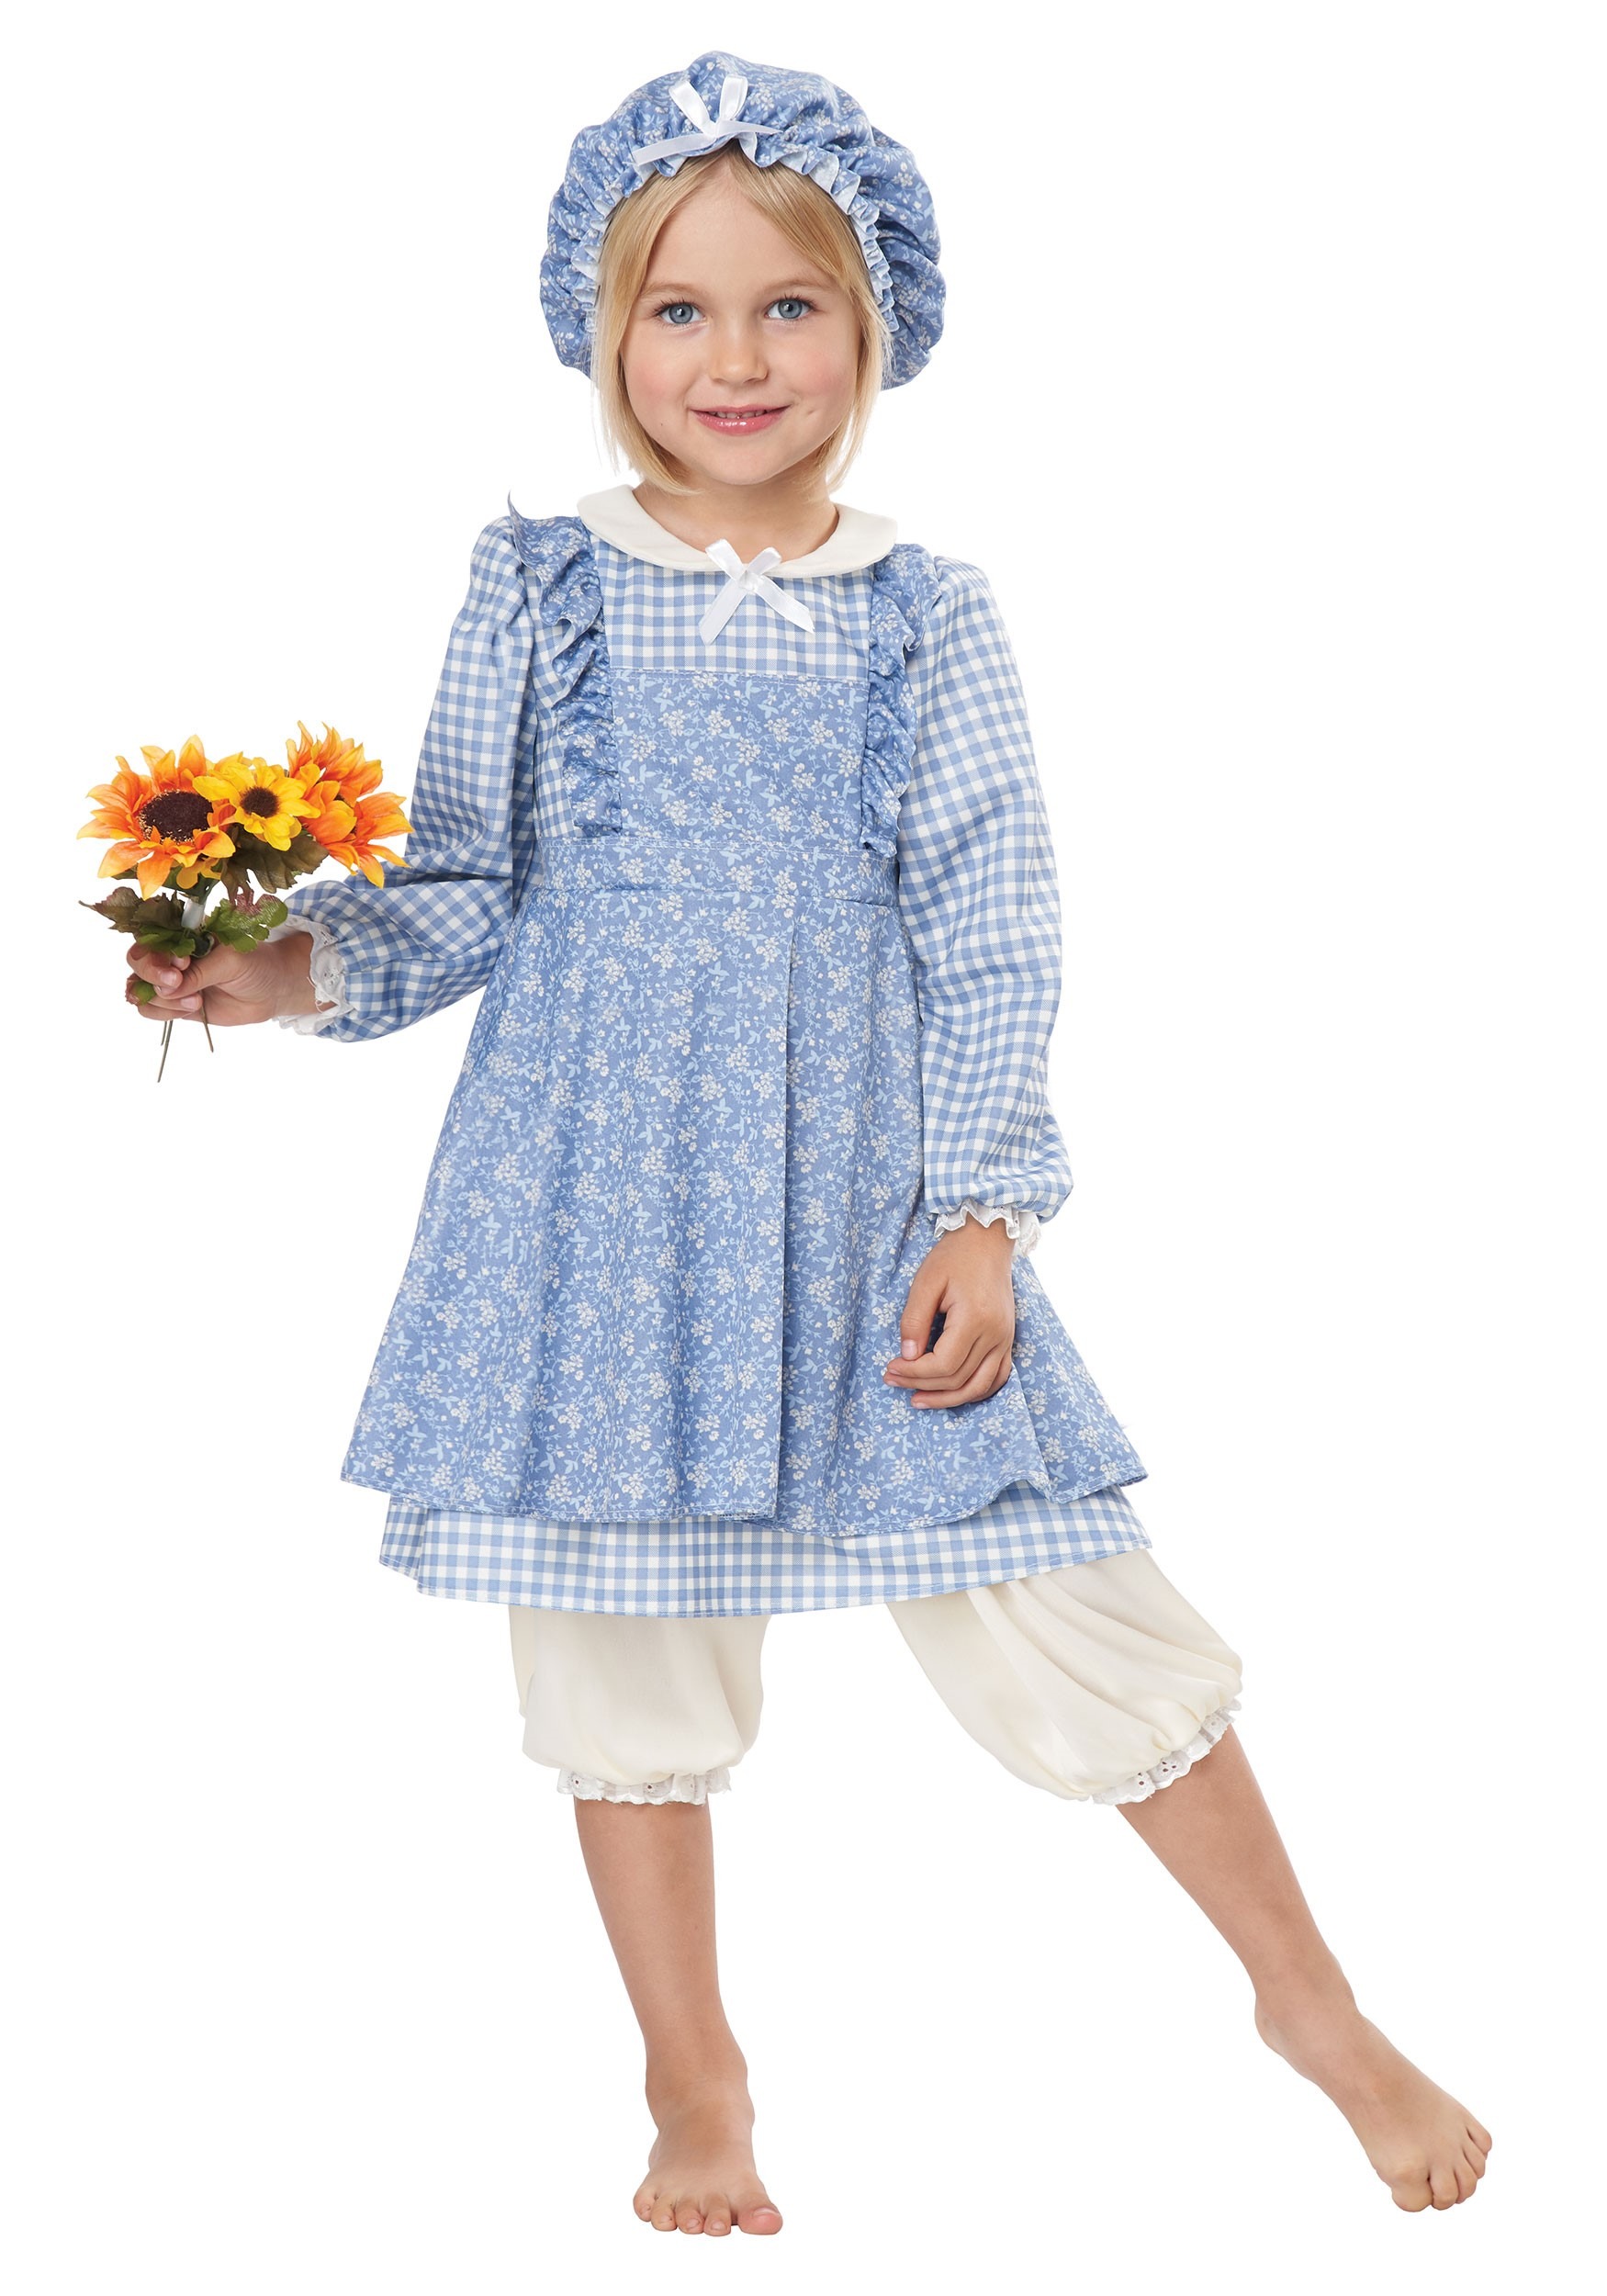 Photos - Fancy Dress California Costume Collection Little Pioneer Girl Costume for Toddlers Blu 